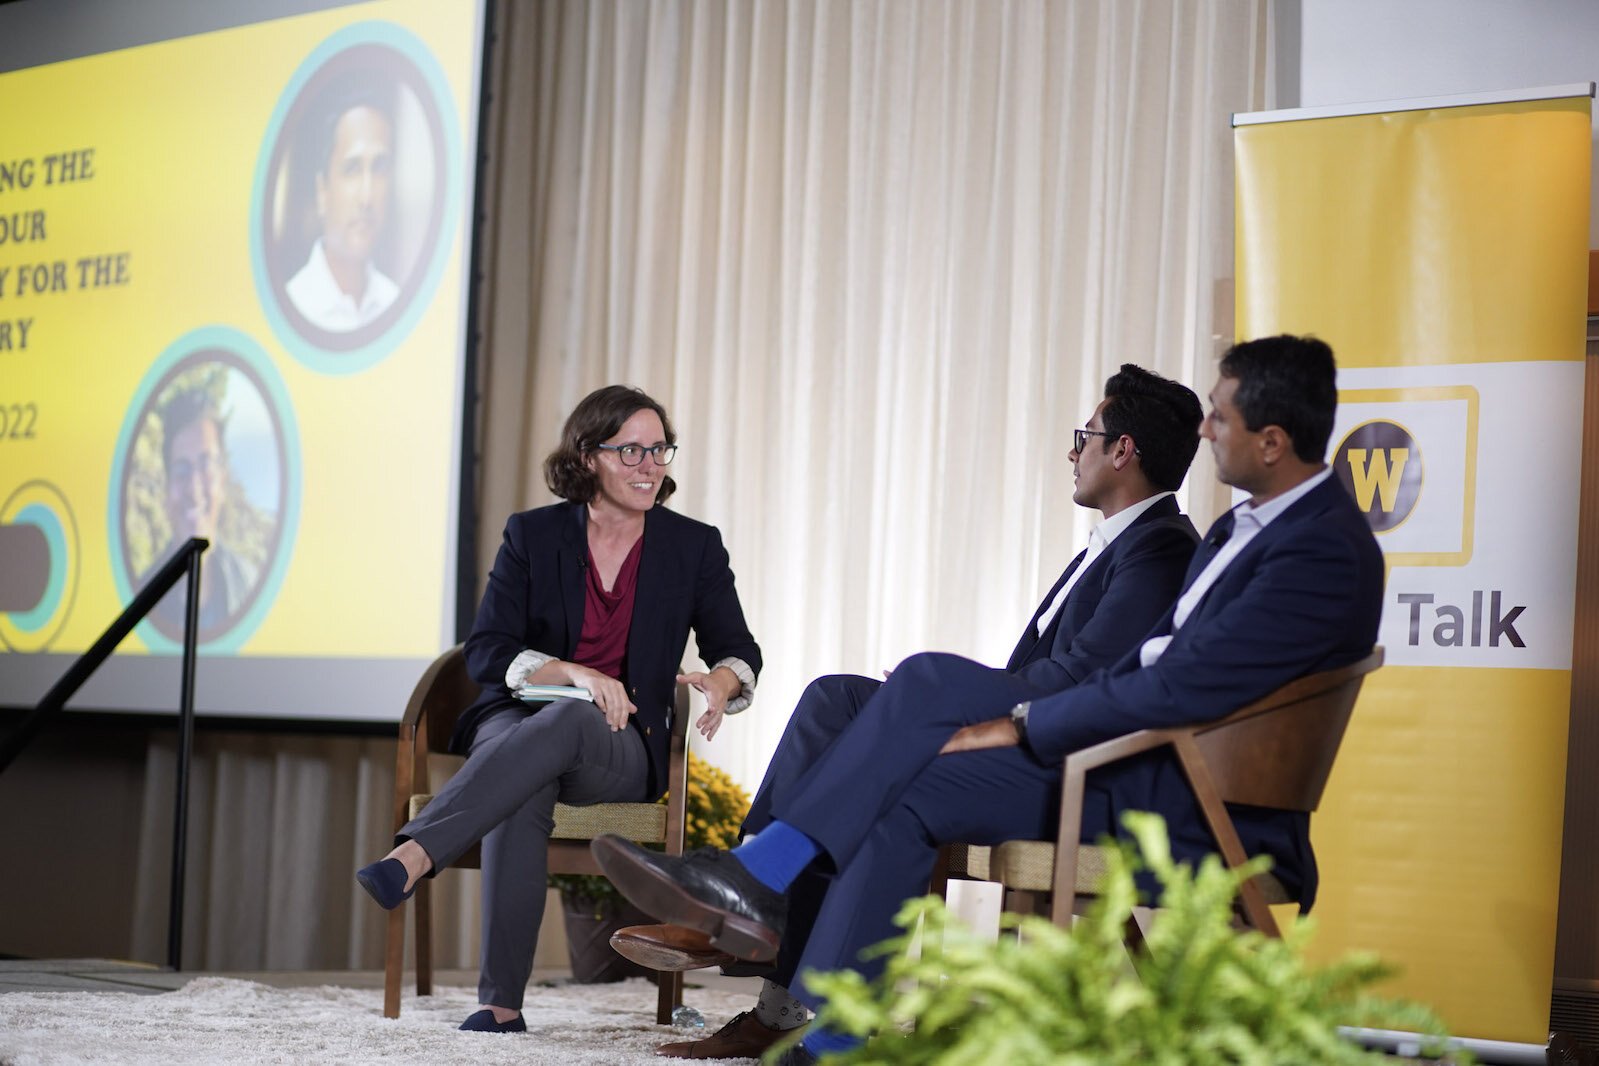 Dr. Lauren Foley, a WMU political science professor, moderated last Thursday's We Talk event featuring Eboo Patel and Manu Meel 